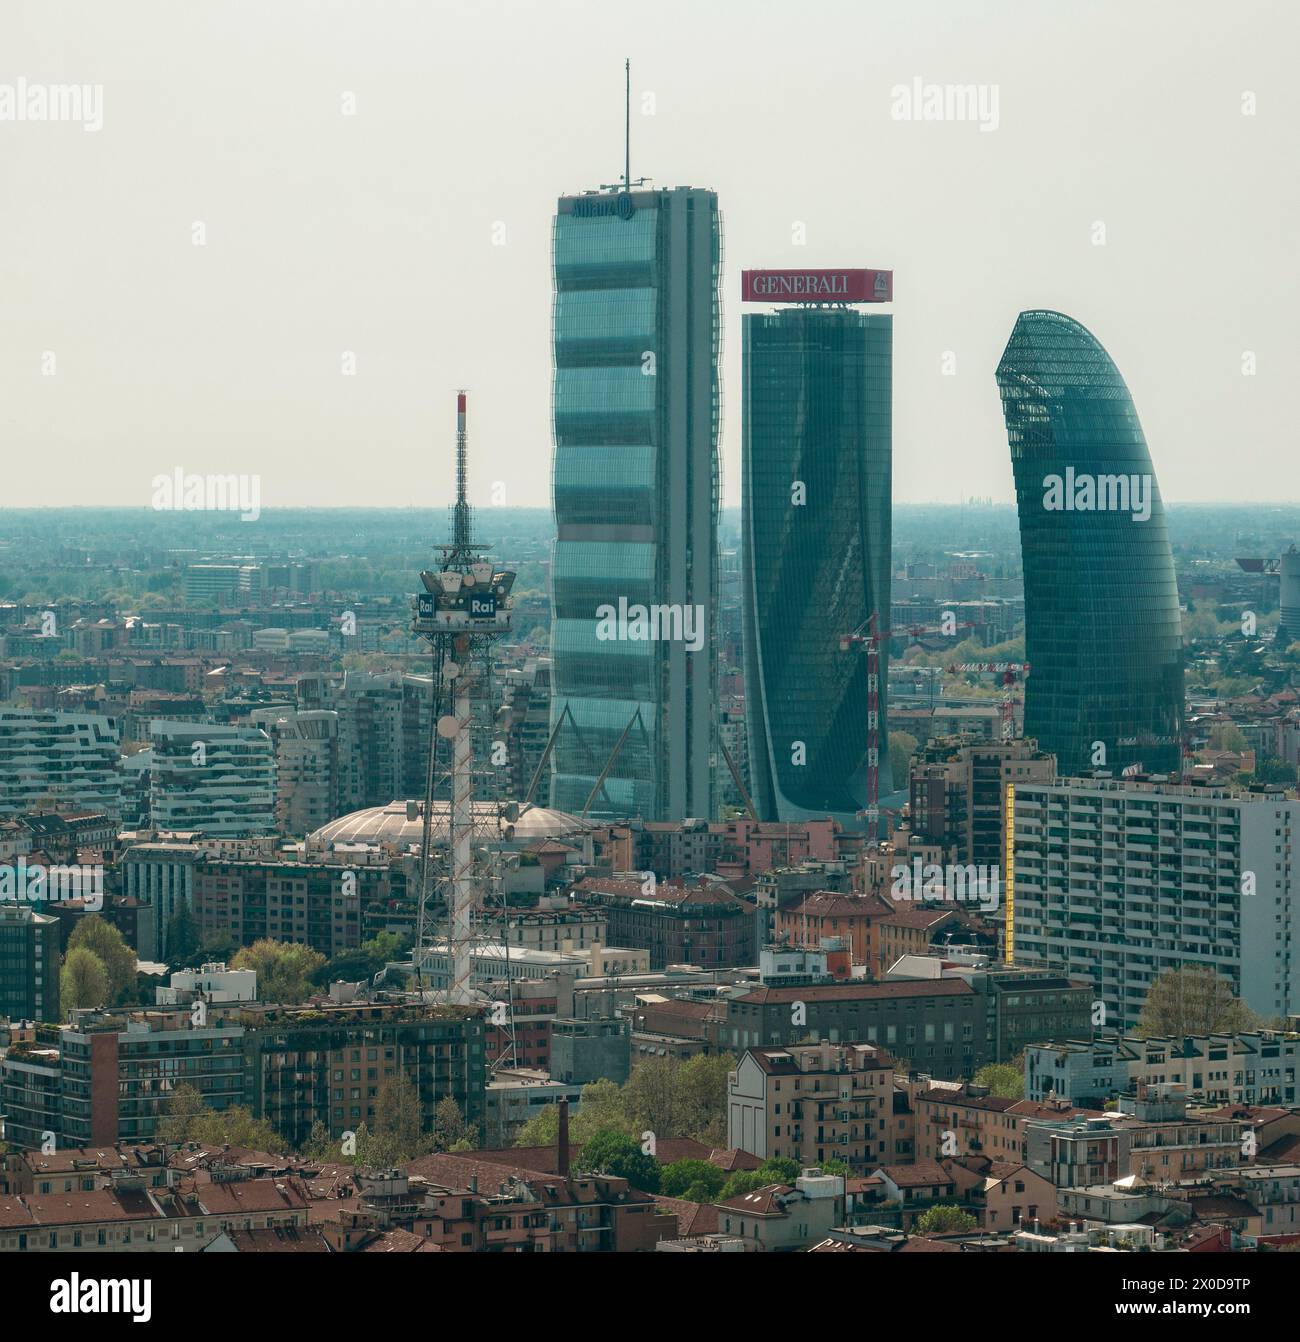 Aerial view of CityLife park with the three tower: The Straight One (Allianz Tower), The Twisted One (Generali Tower), The Curved One, Milan, italy Stock Photo